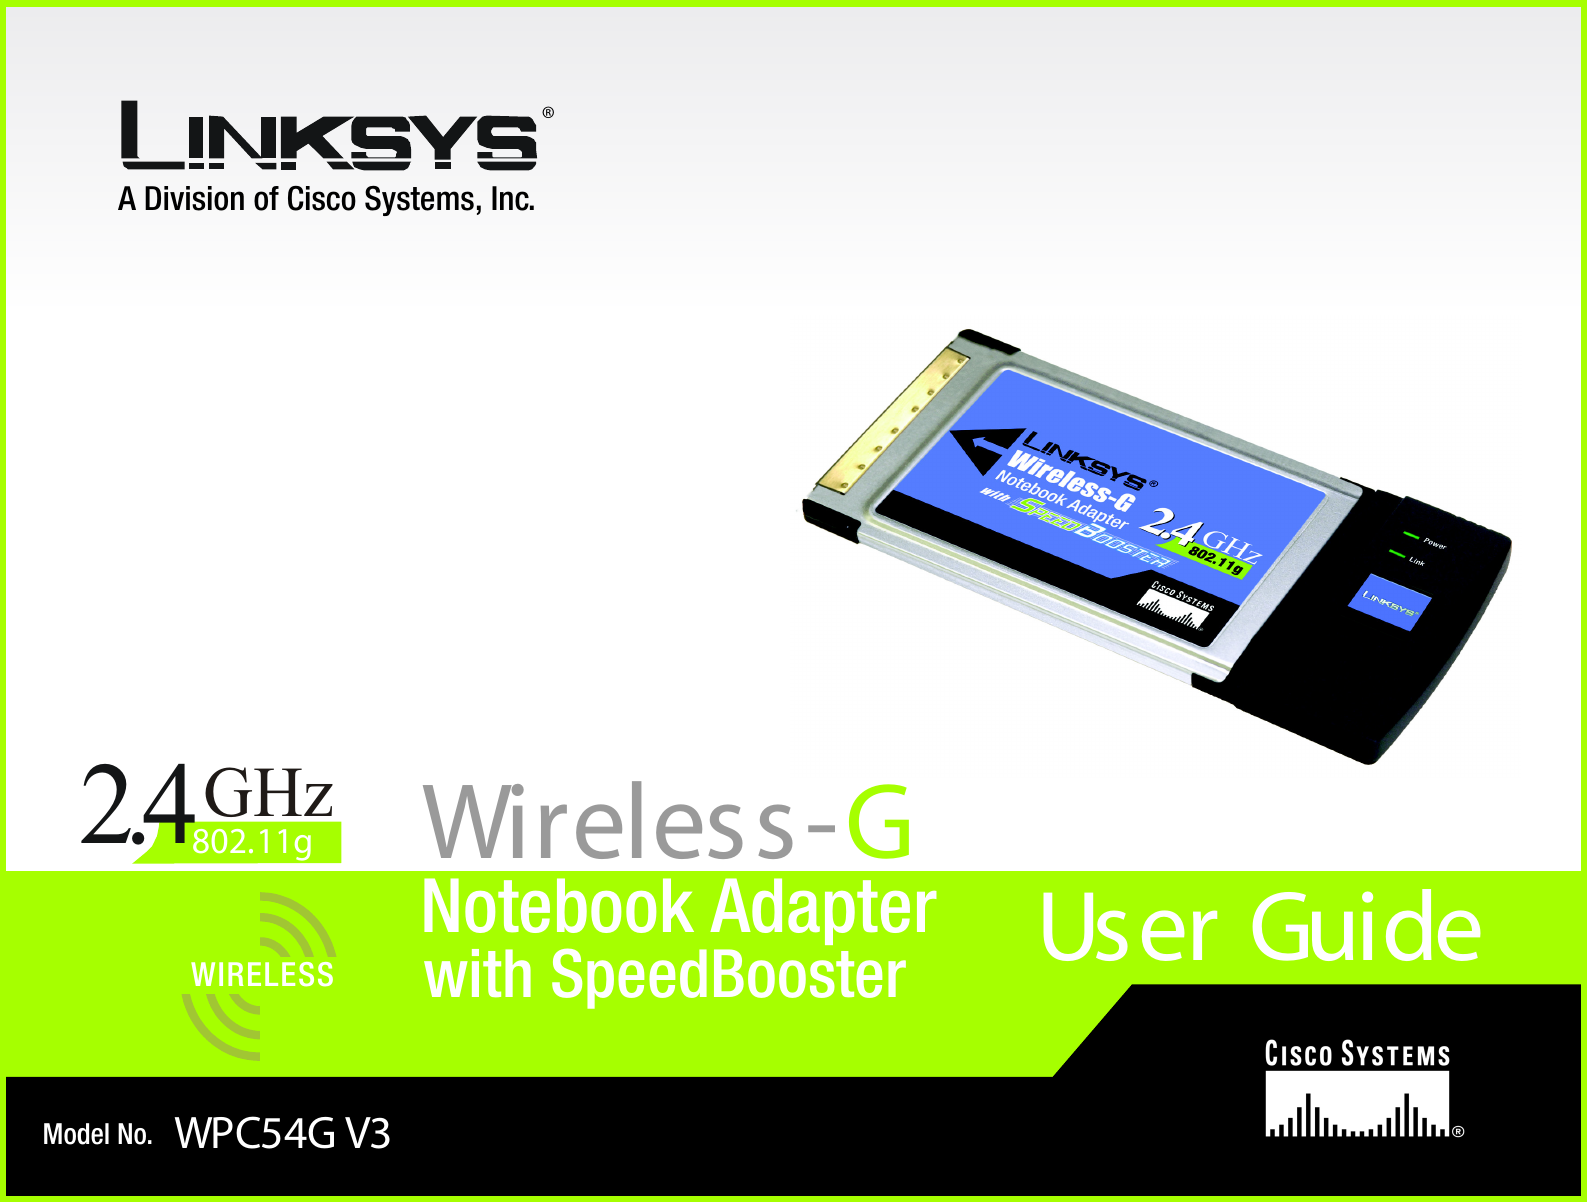 A Division of Cisco Systems, Inc.®Model No.Notebook AdapterWireless-GWPC54G V3User GuideWIRELESSGHz2.4802.11gwith SpeedBooster